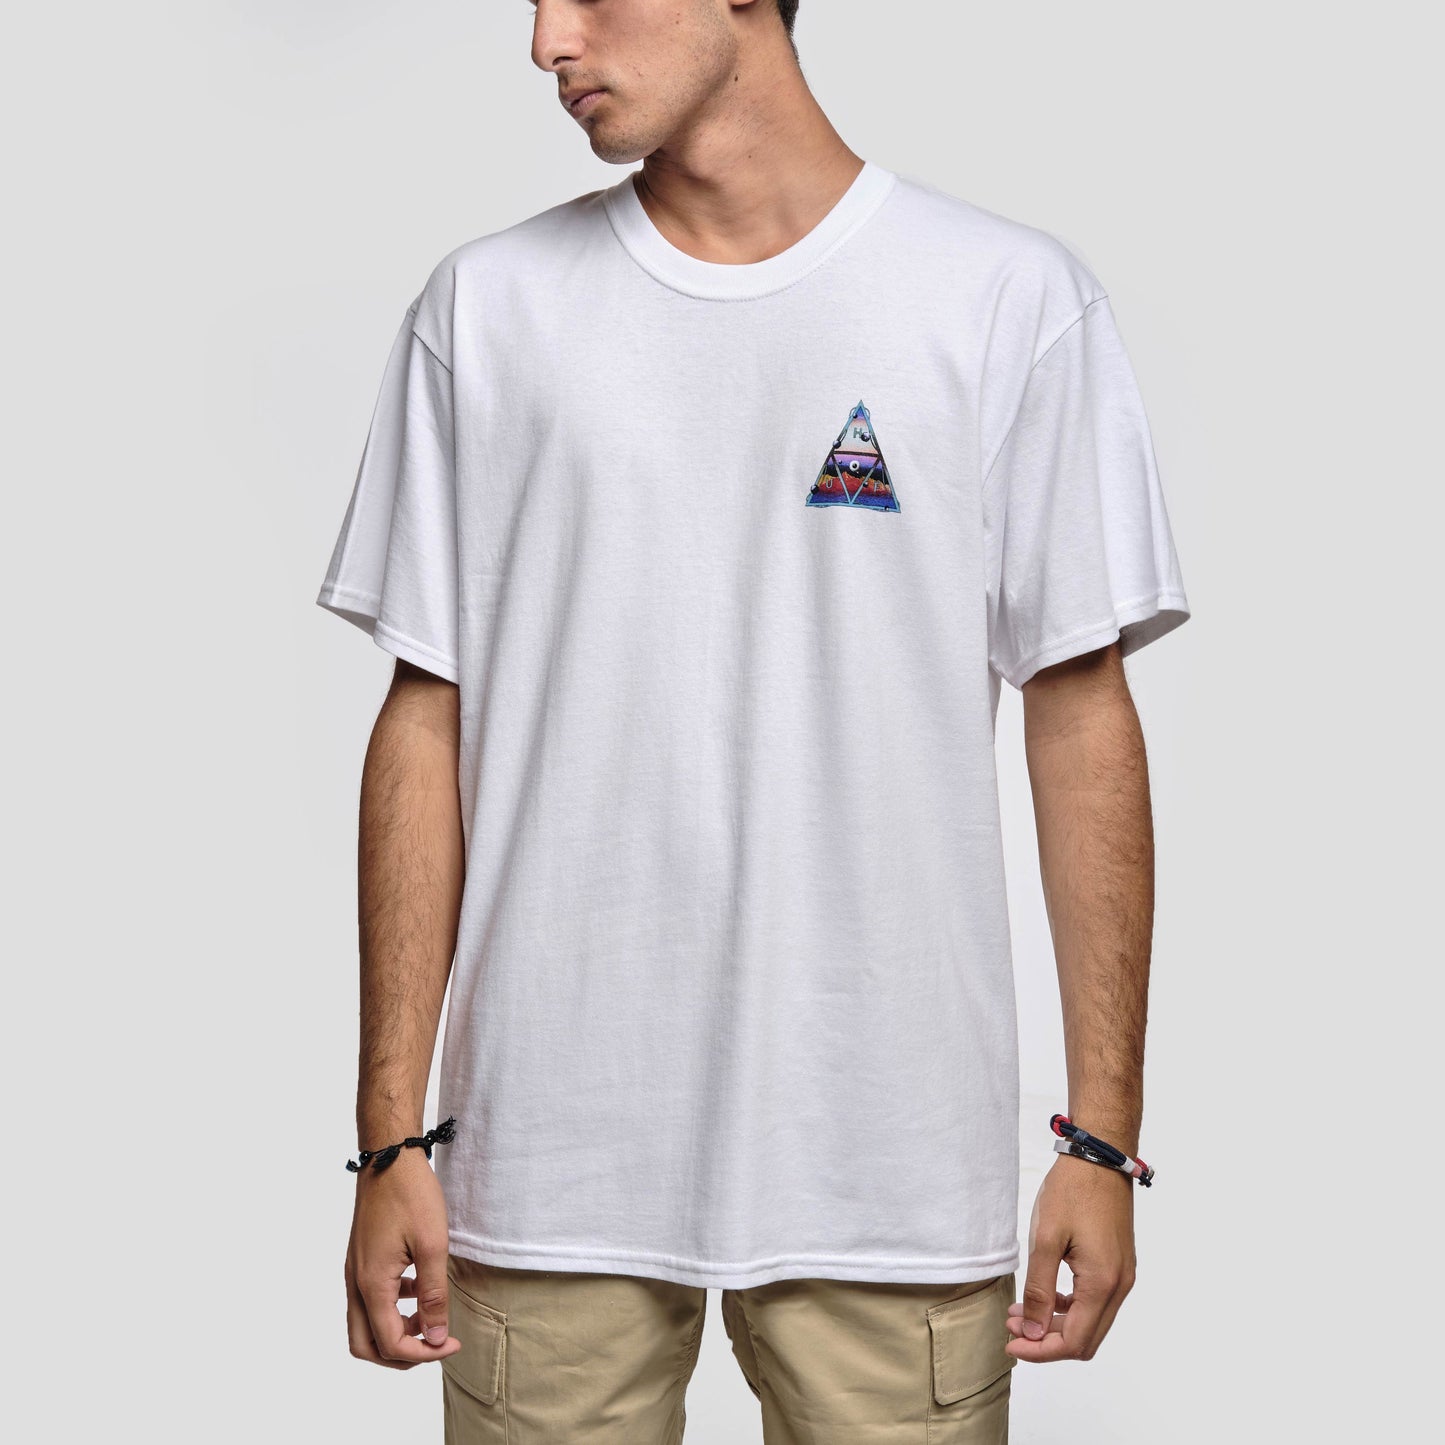 HUF Camiseta Altered State - TS01420 - Colección Chico